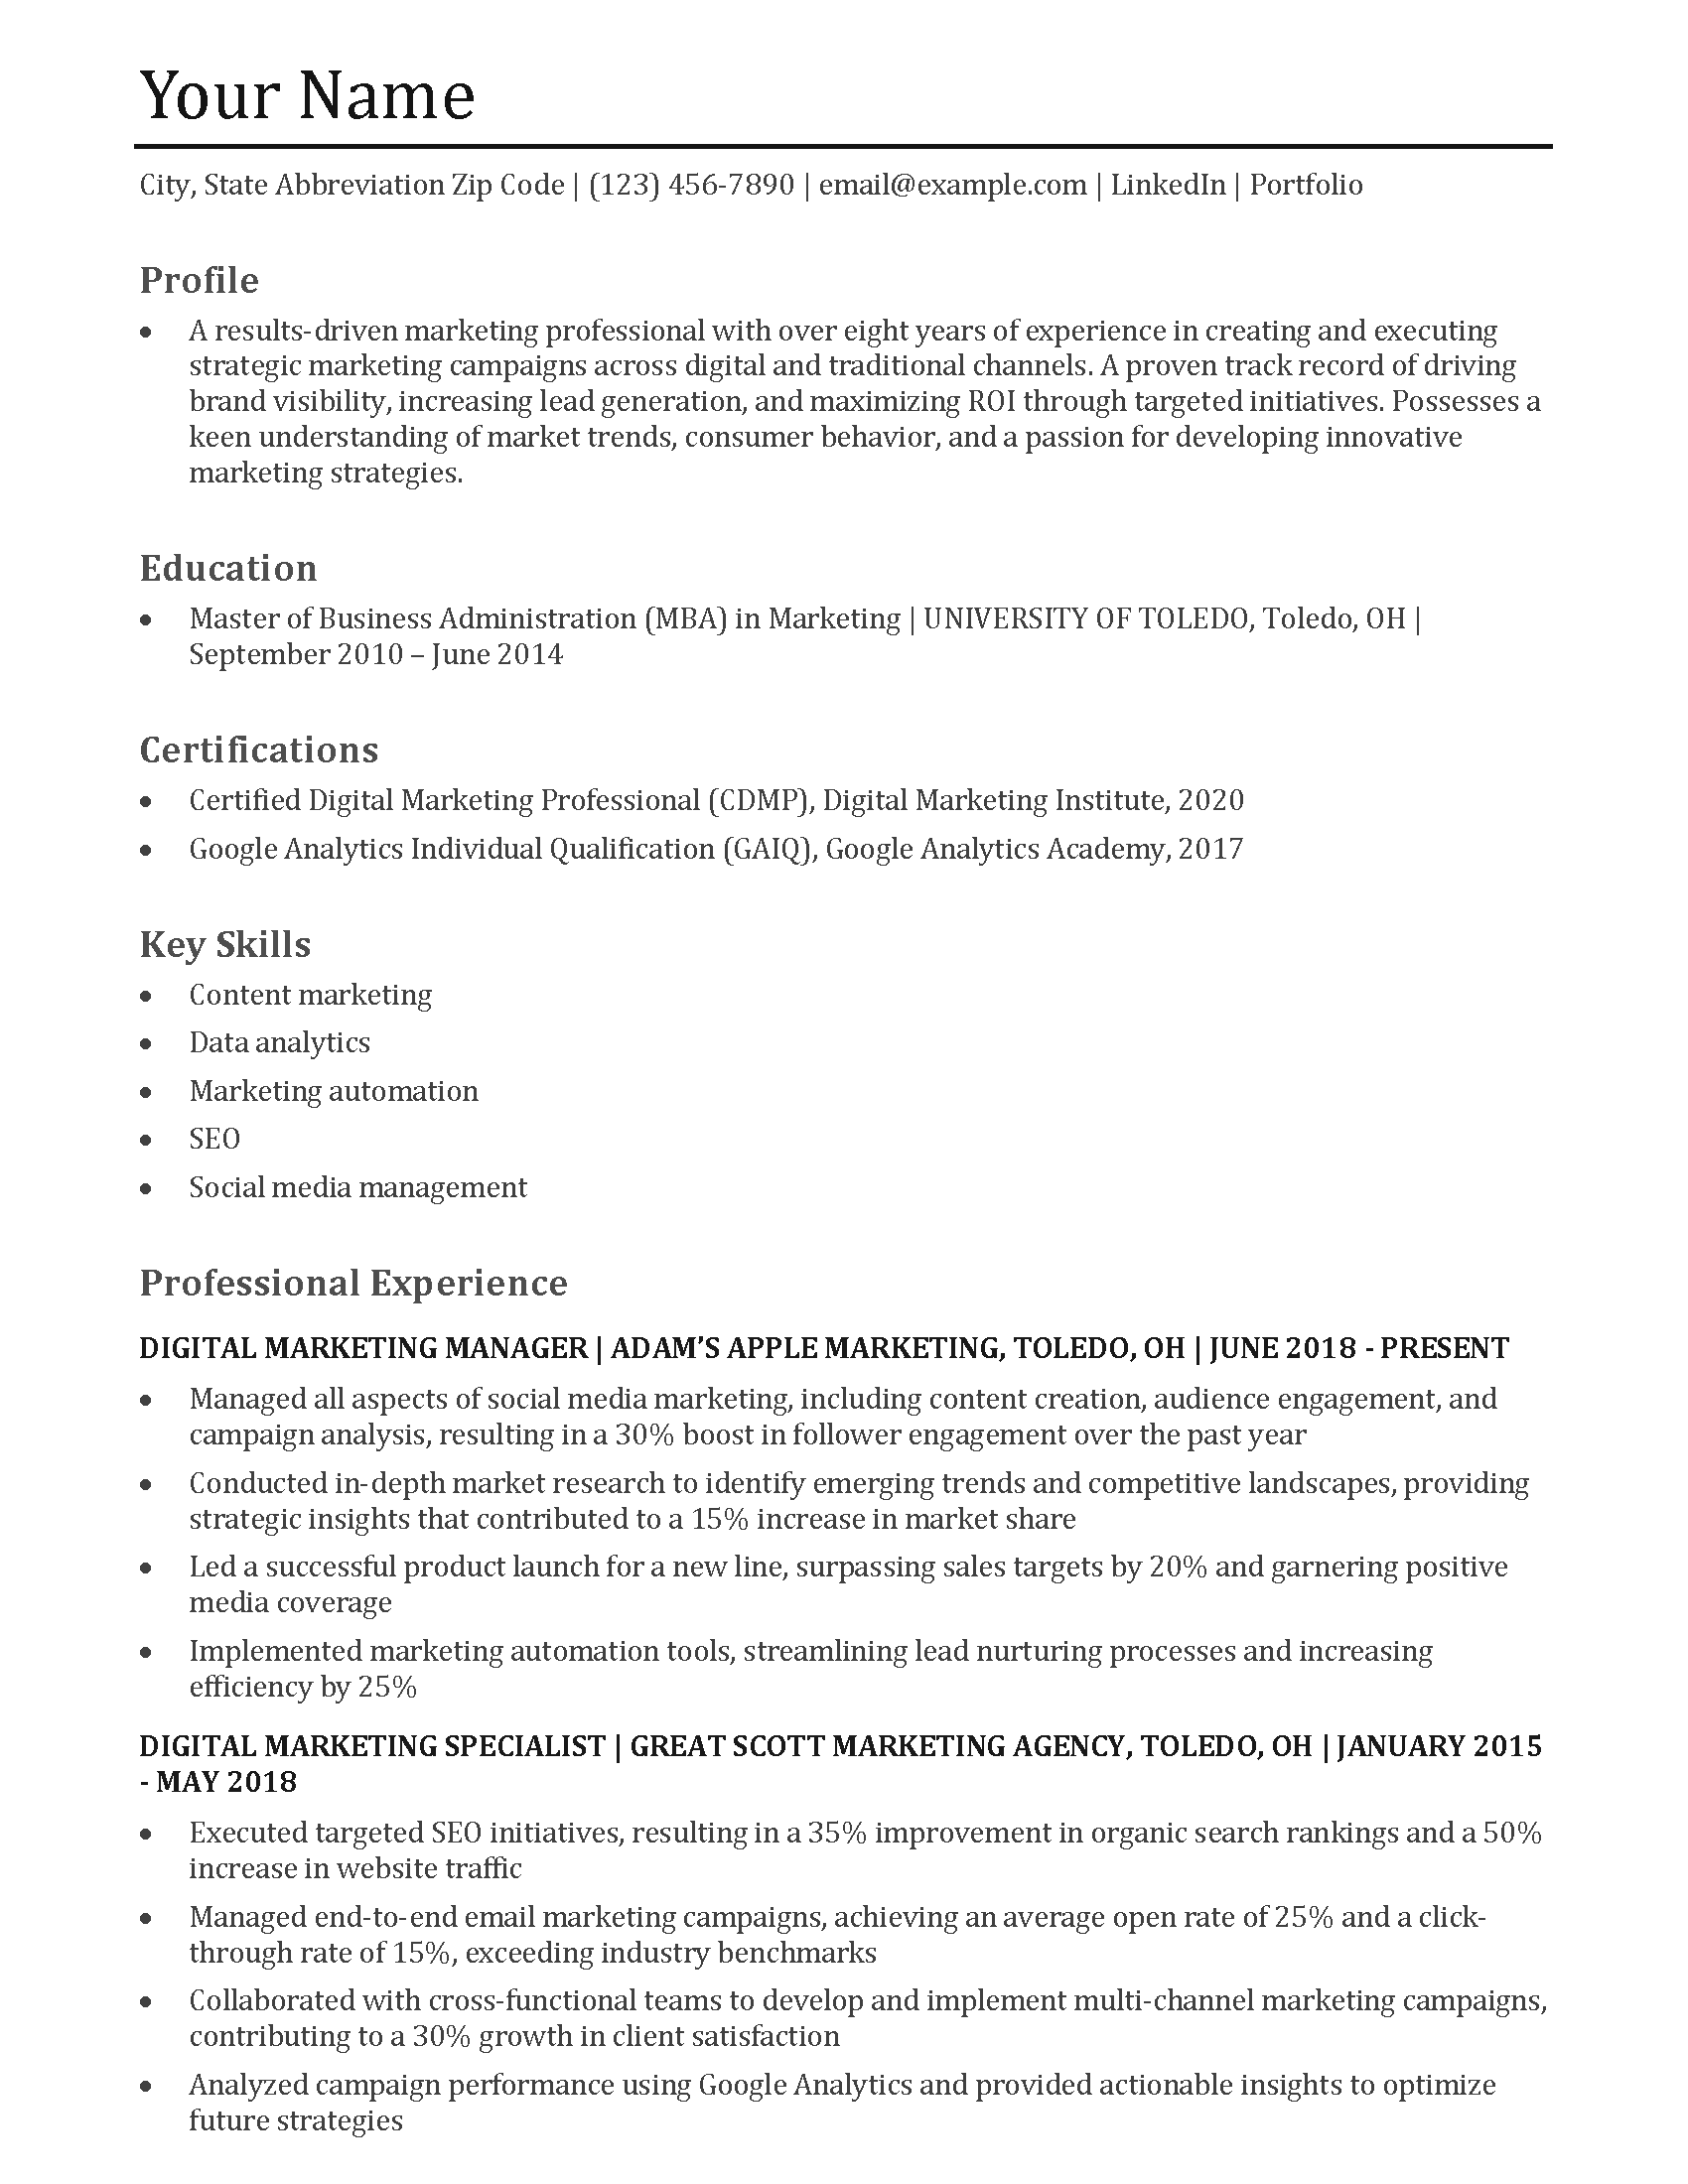 Marketing Resume Templates and Examples Banner Image